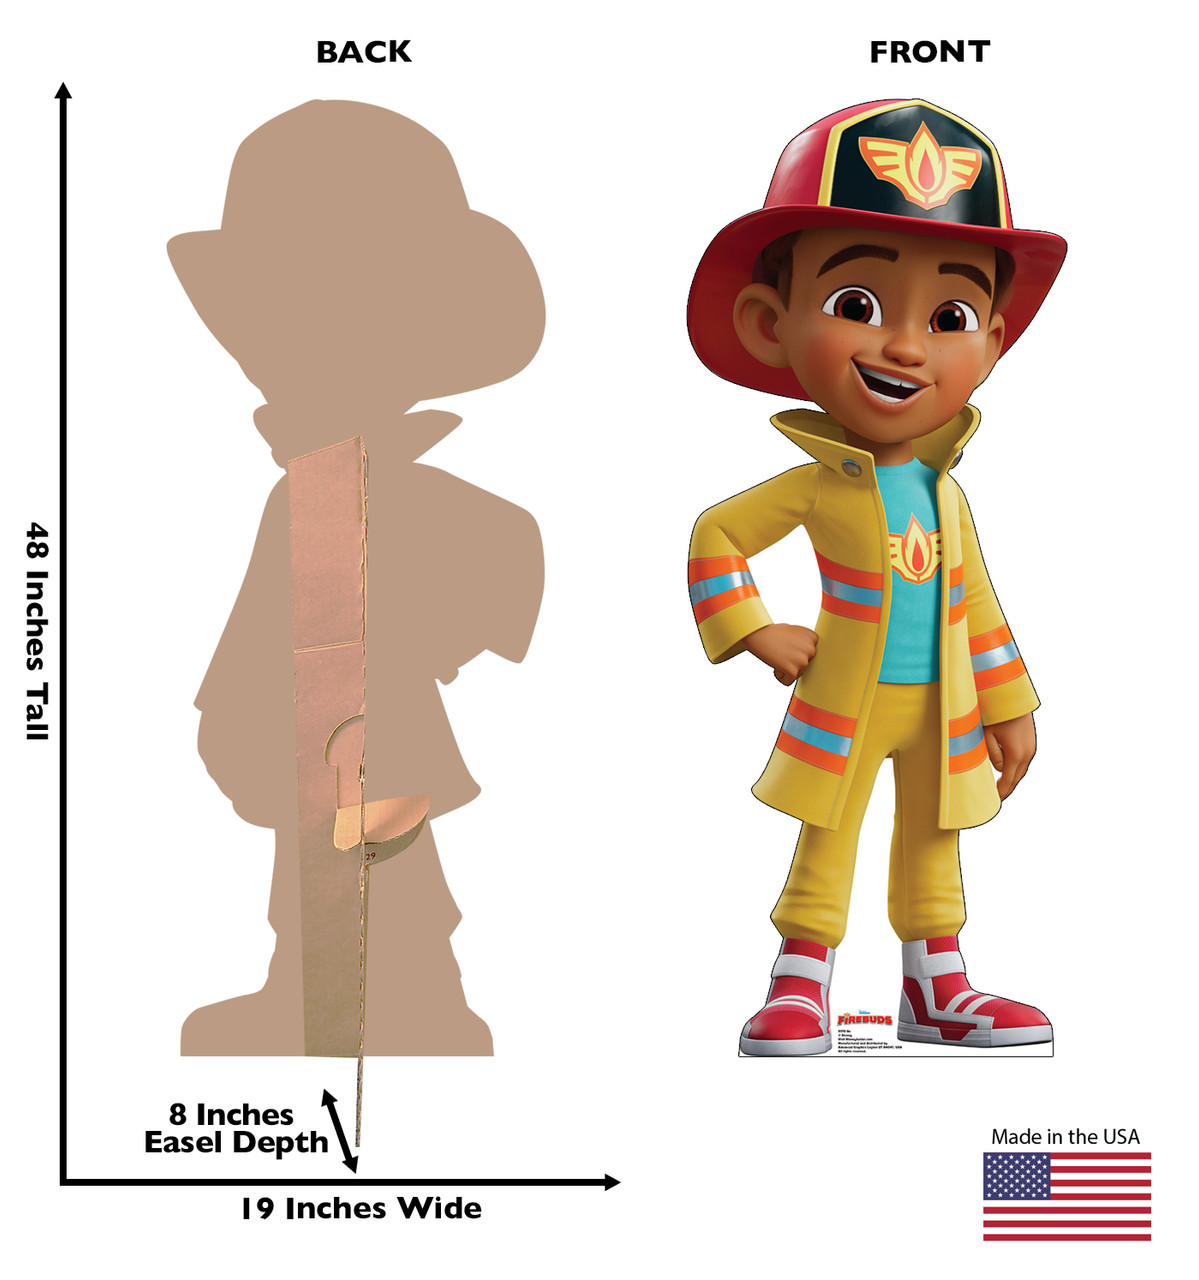 Life-size cardboard standee of Bo with back and front dimensions.